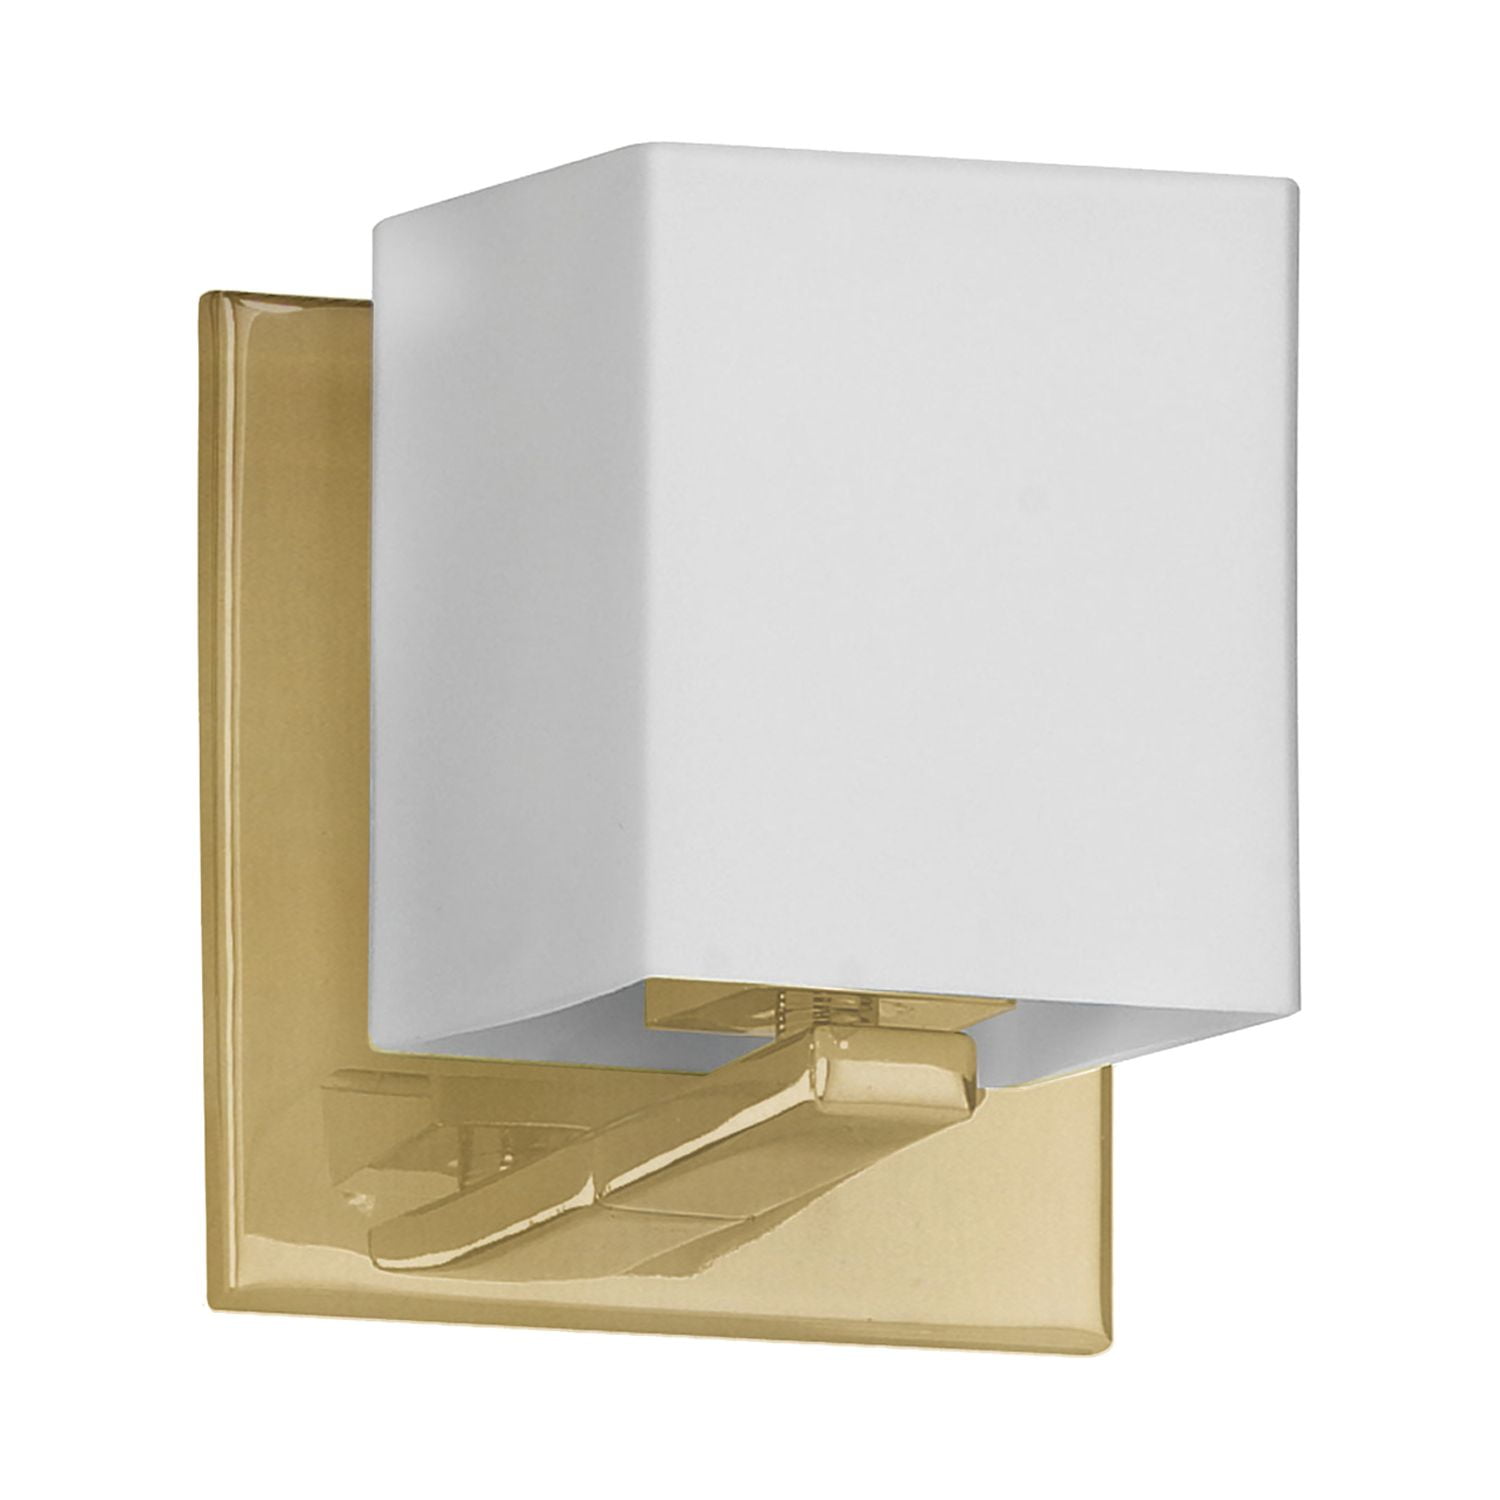 Picture of Dainolite V1230-1W-AGB 1 Light Halogen Wall Sconce, Aged Brass with White Glass